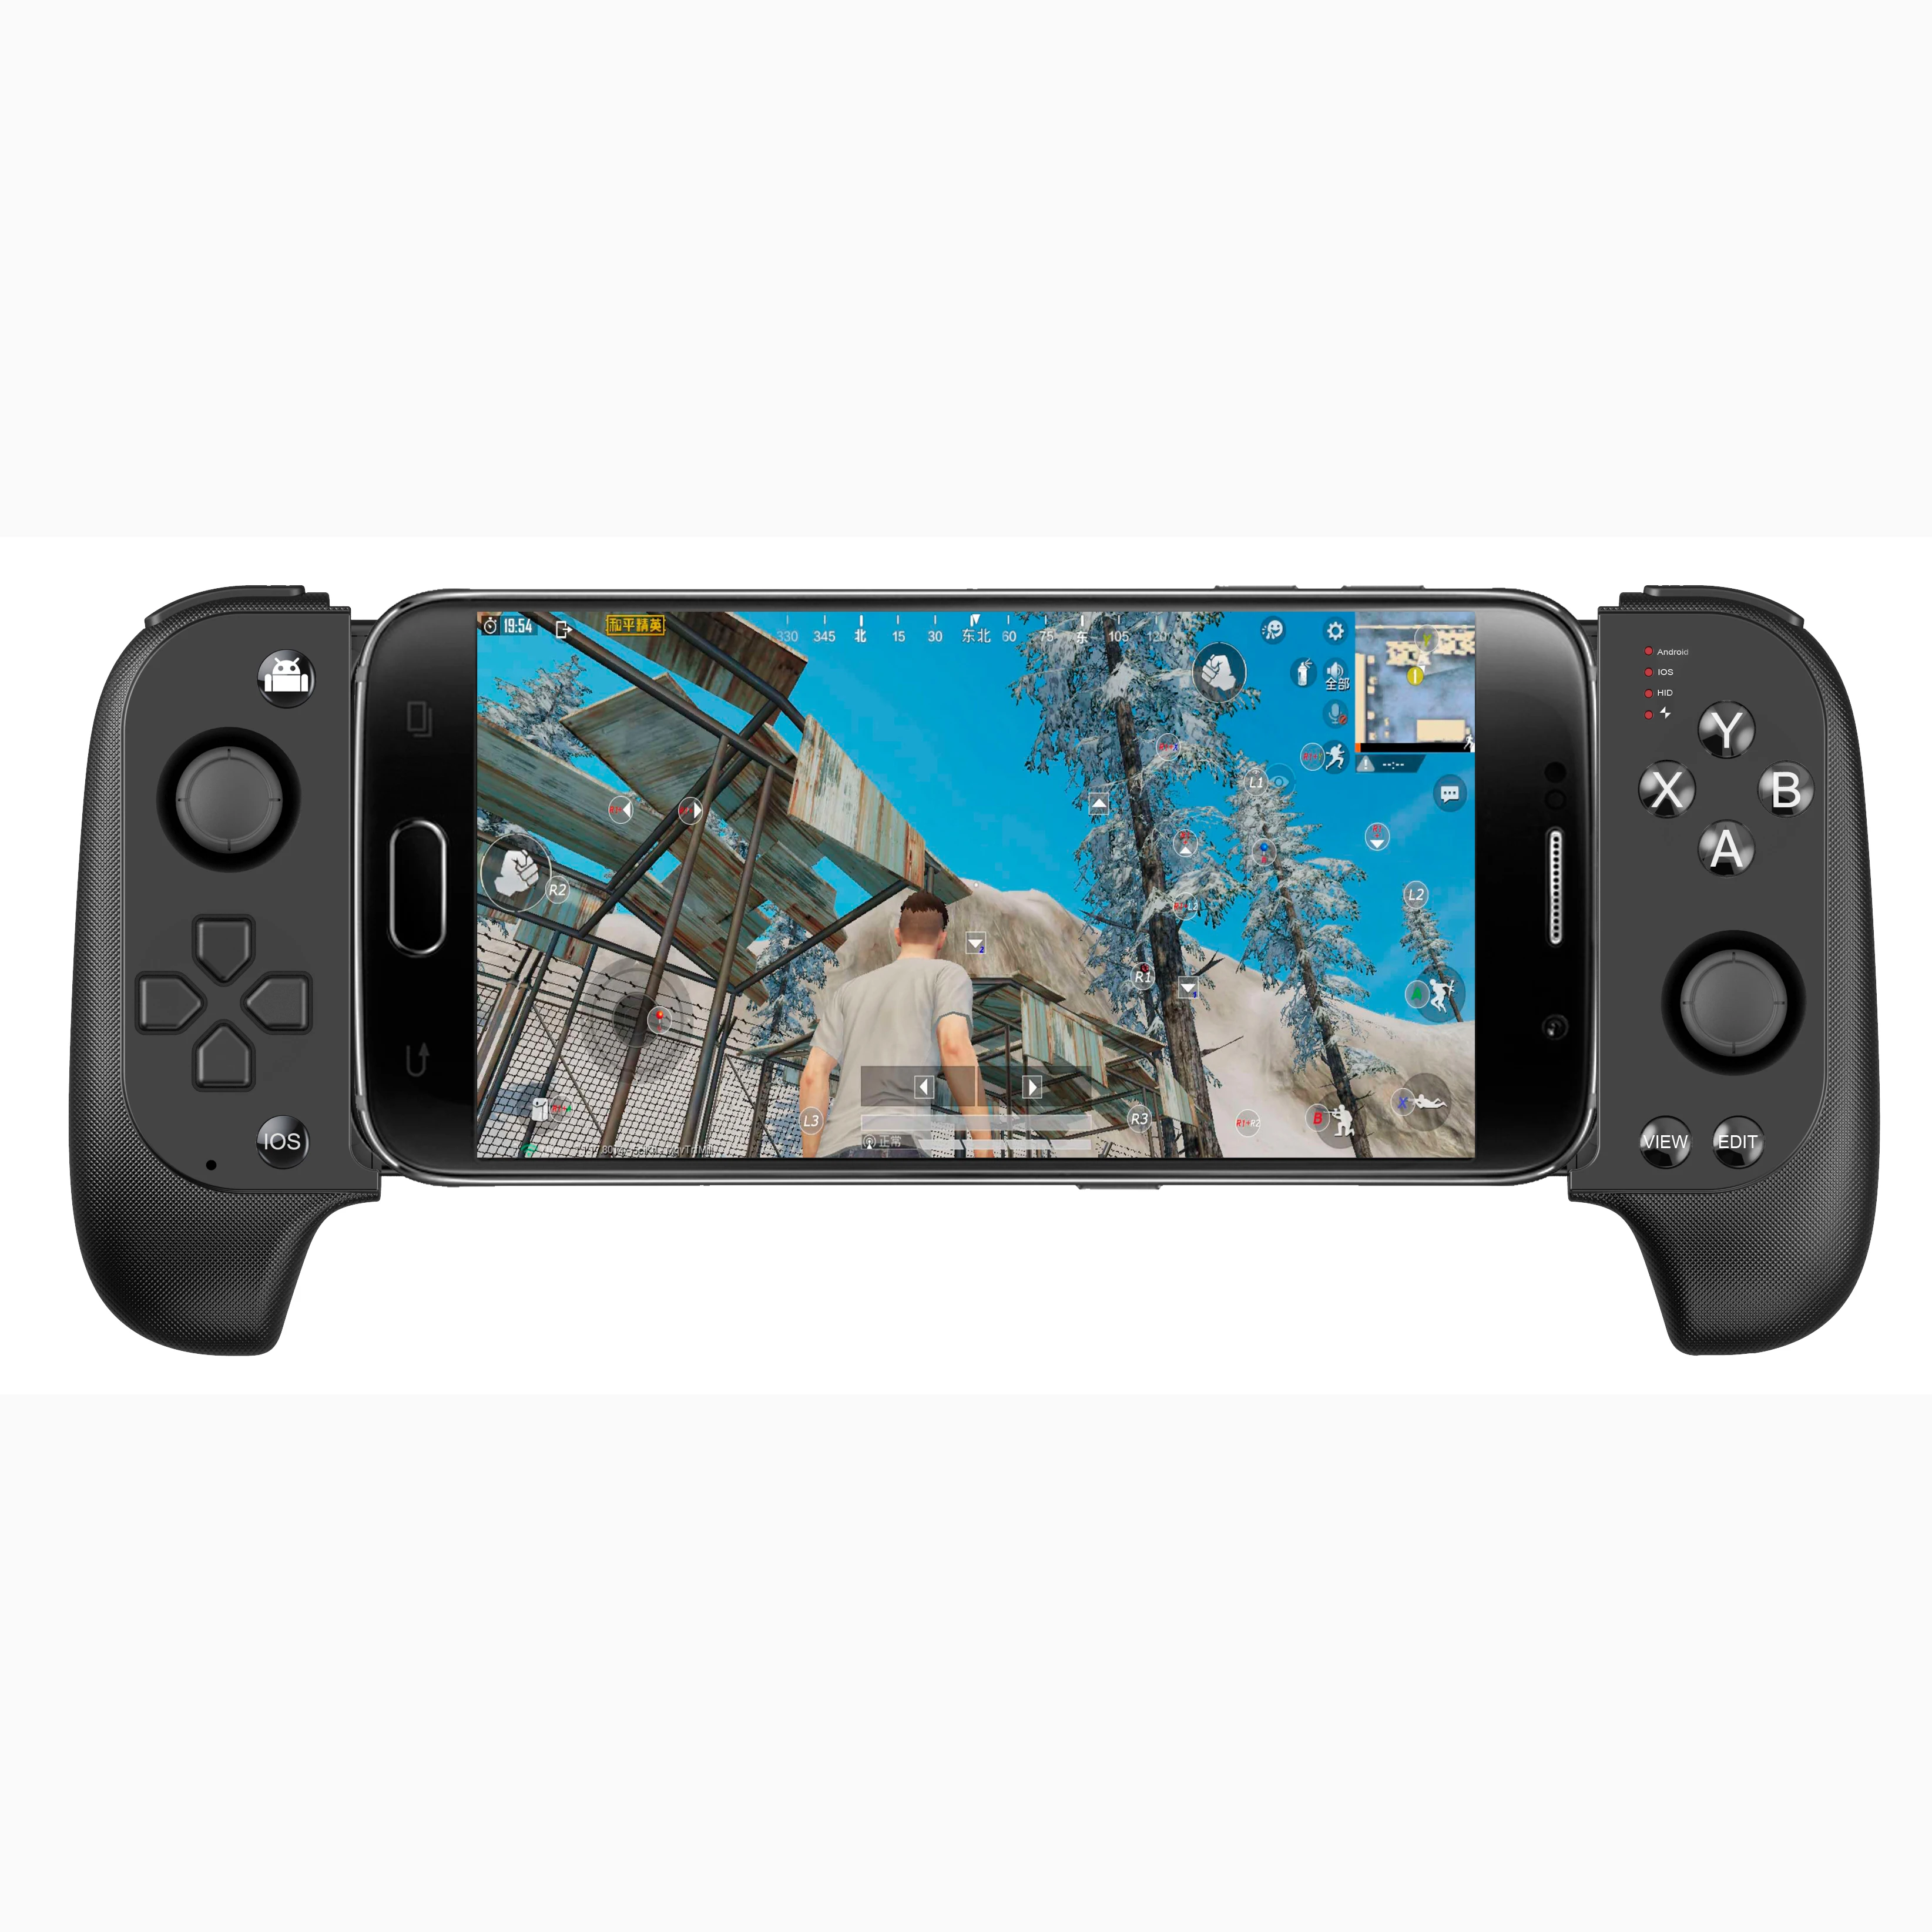 Saitake Gamepad Wireless Gamepad Mobile Gamepad For Pubg Mobile Controller - Buy Pubg Mobile Joystick & Game Controller,Smartphone Android Ios For Mobile Joystick & Game Controller,New Multi-function For Pubg Cellphone Joypad